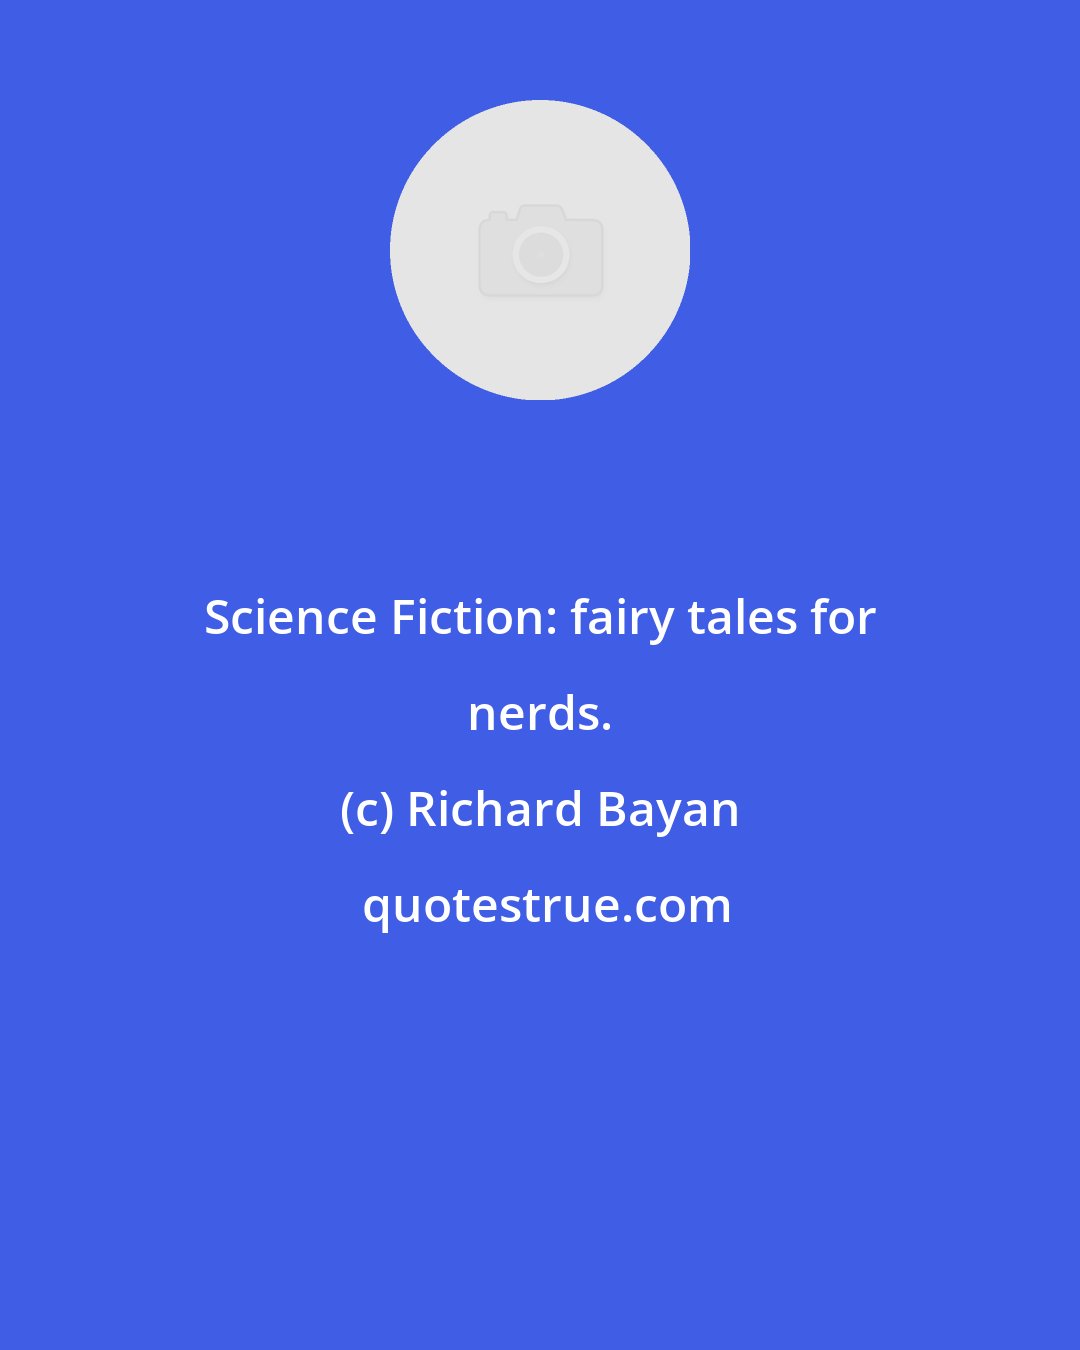 Richard Bayan: Science Fiction: fairy tales for nerds.